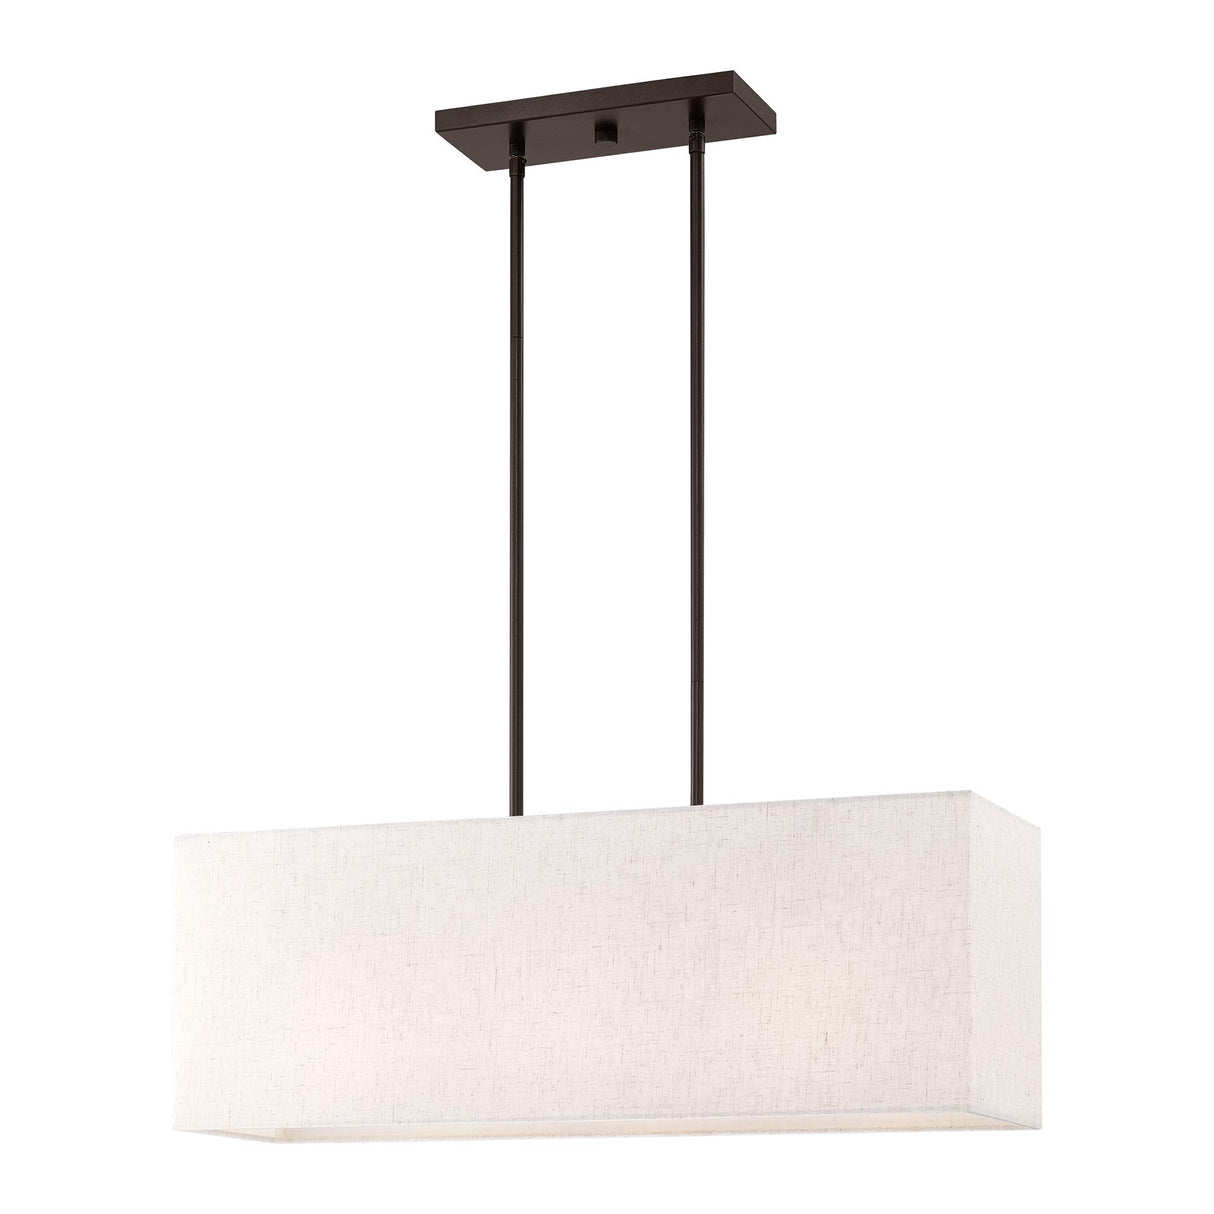 Livex Lighting 41154-92 Transitional Three Light Linear Chandelier from Summit Collection Dark Finish, 28.00 inches, 11.50x28.00x8.00, English Bronze